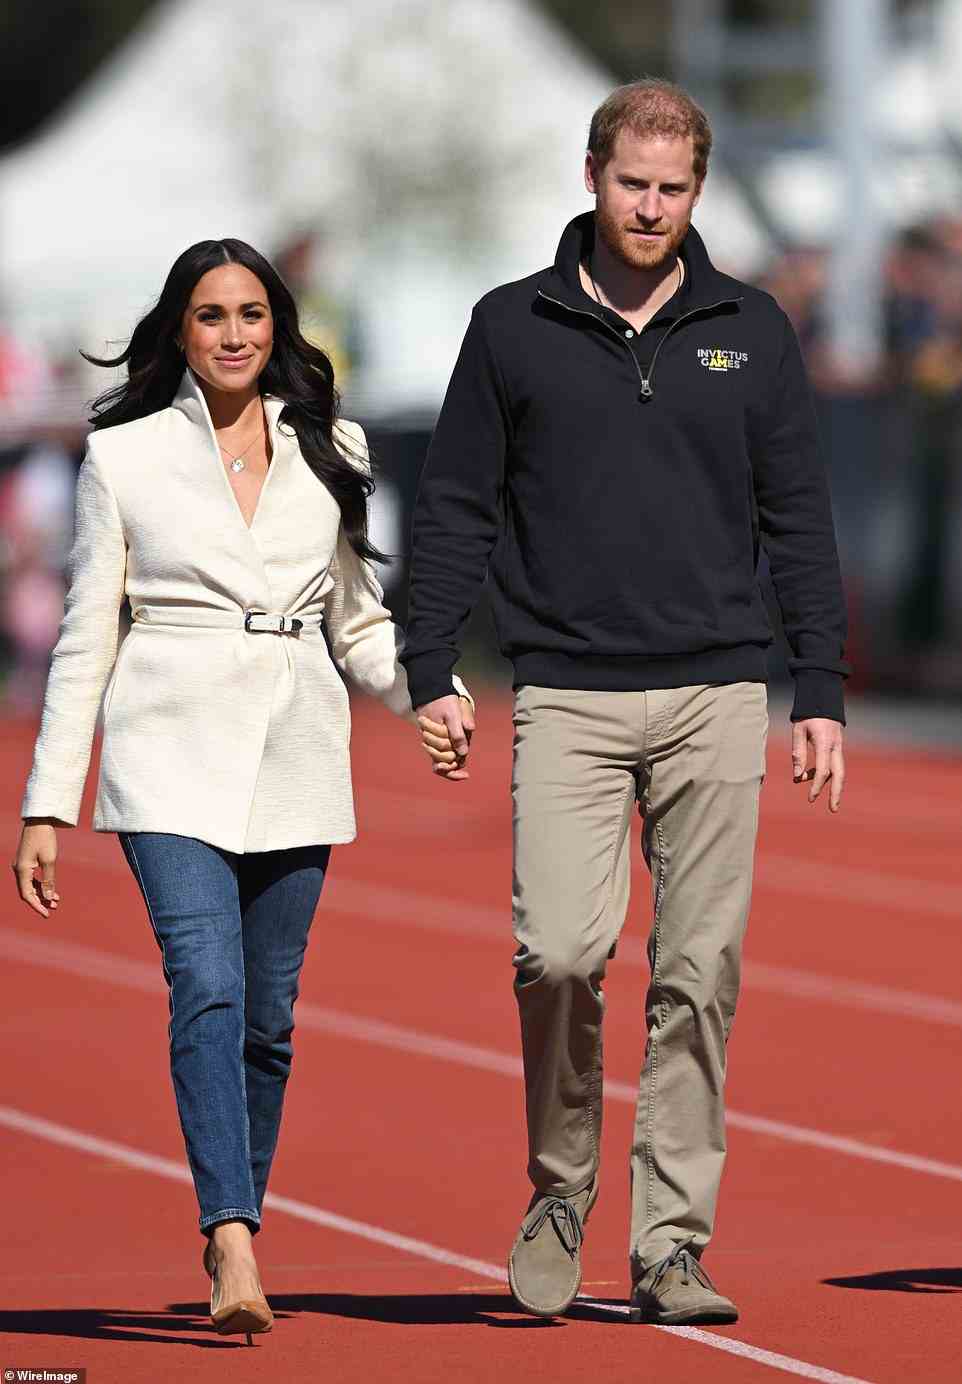 Tom Bower, author of Revenge, claims the Duchess of Sussex 'reduced people to tears with her passive aggressive tone' and demanded first-class flights and luxury accommodation for business trips. Pictured, Meghan and Harry at the Invictus Games in April